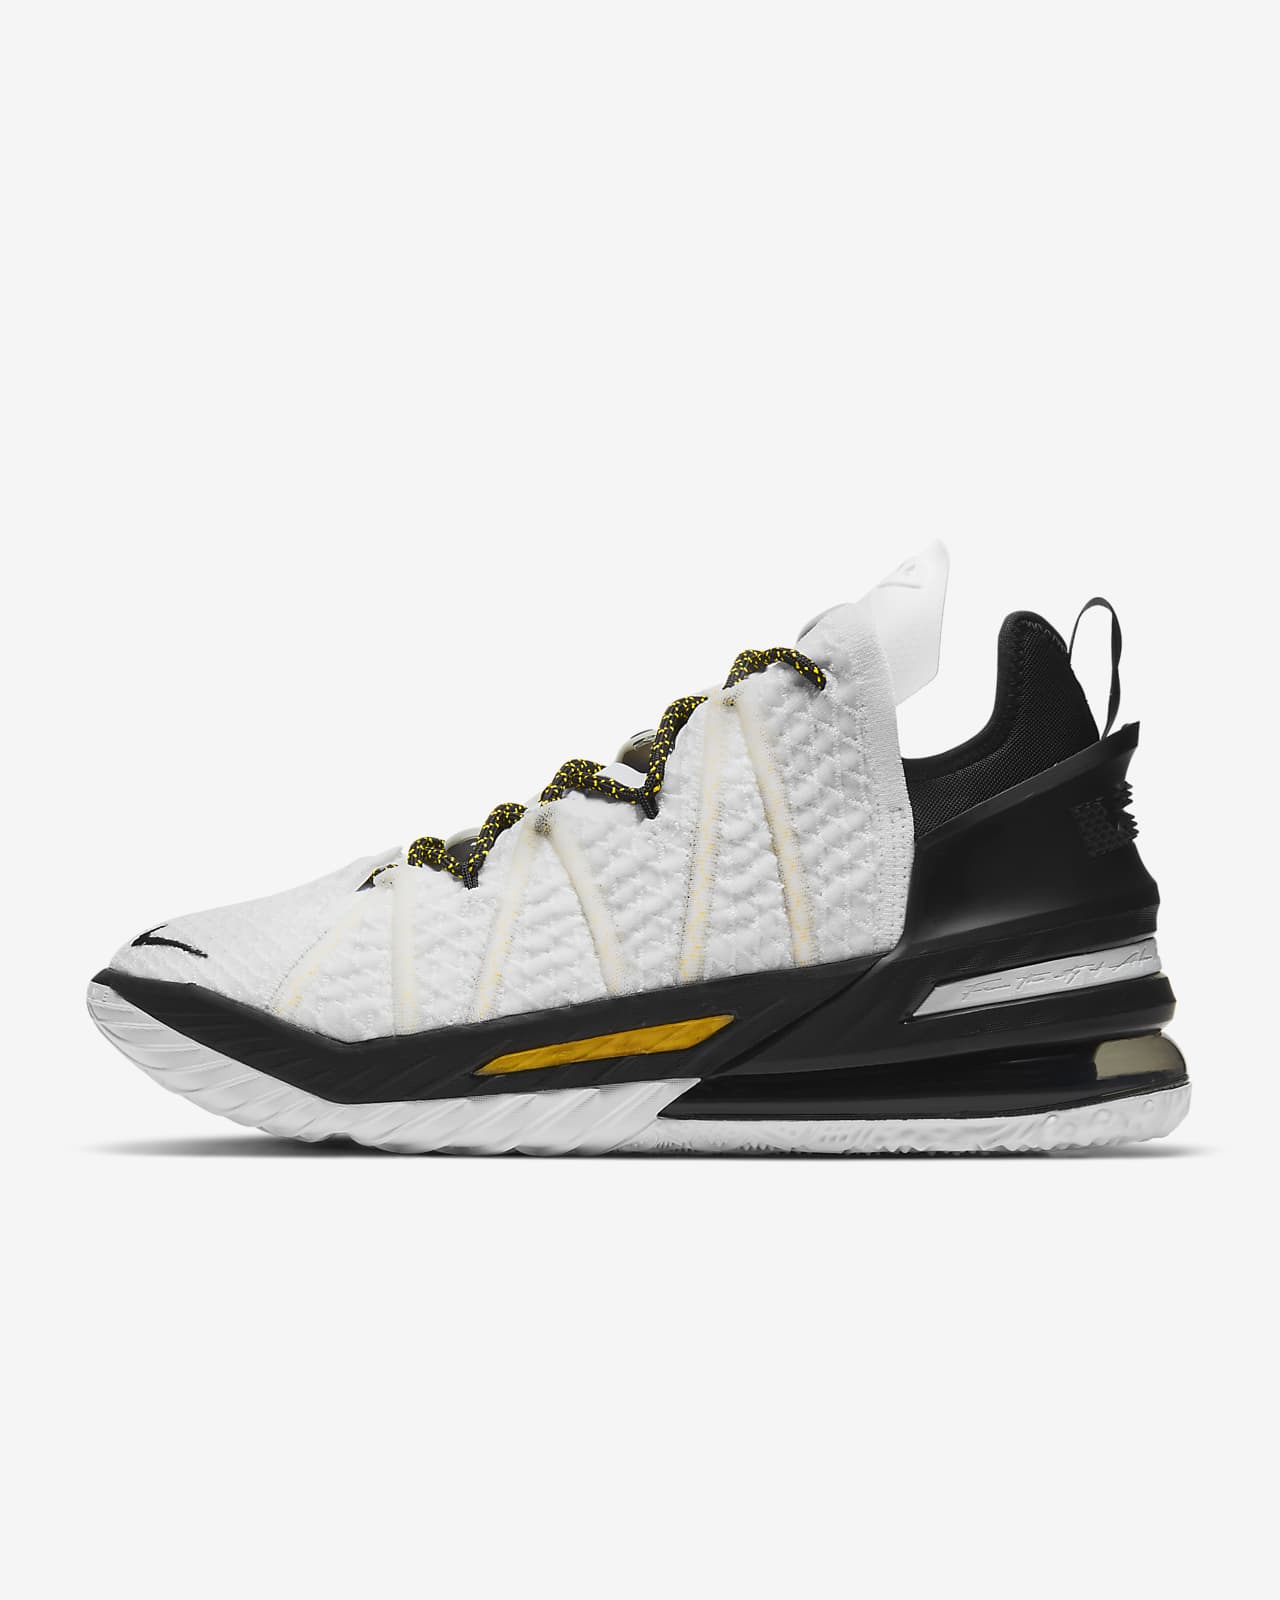 white gold basketball shoes